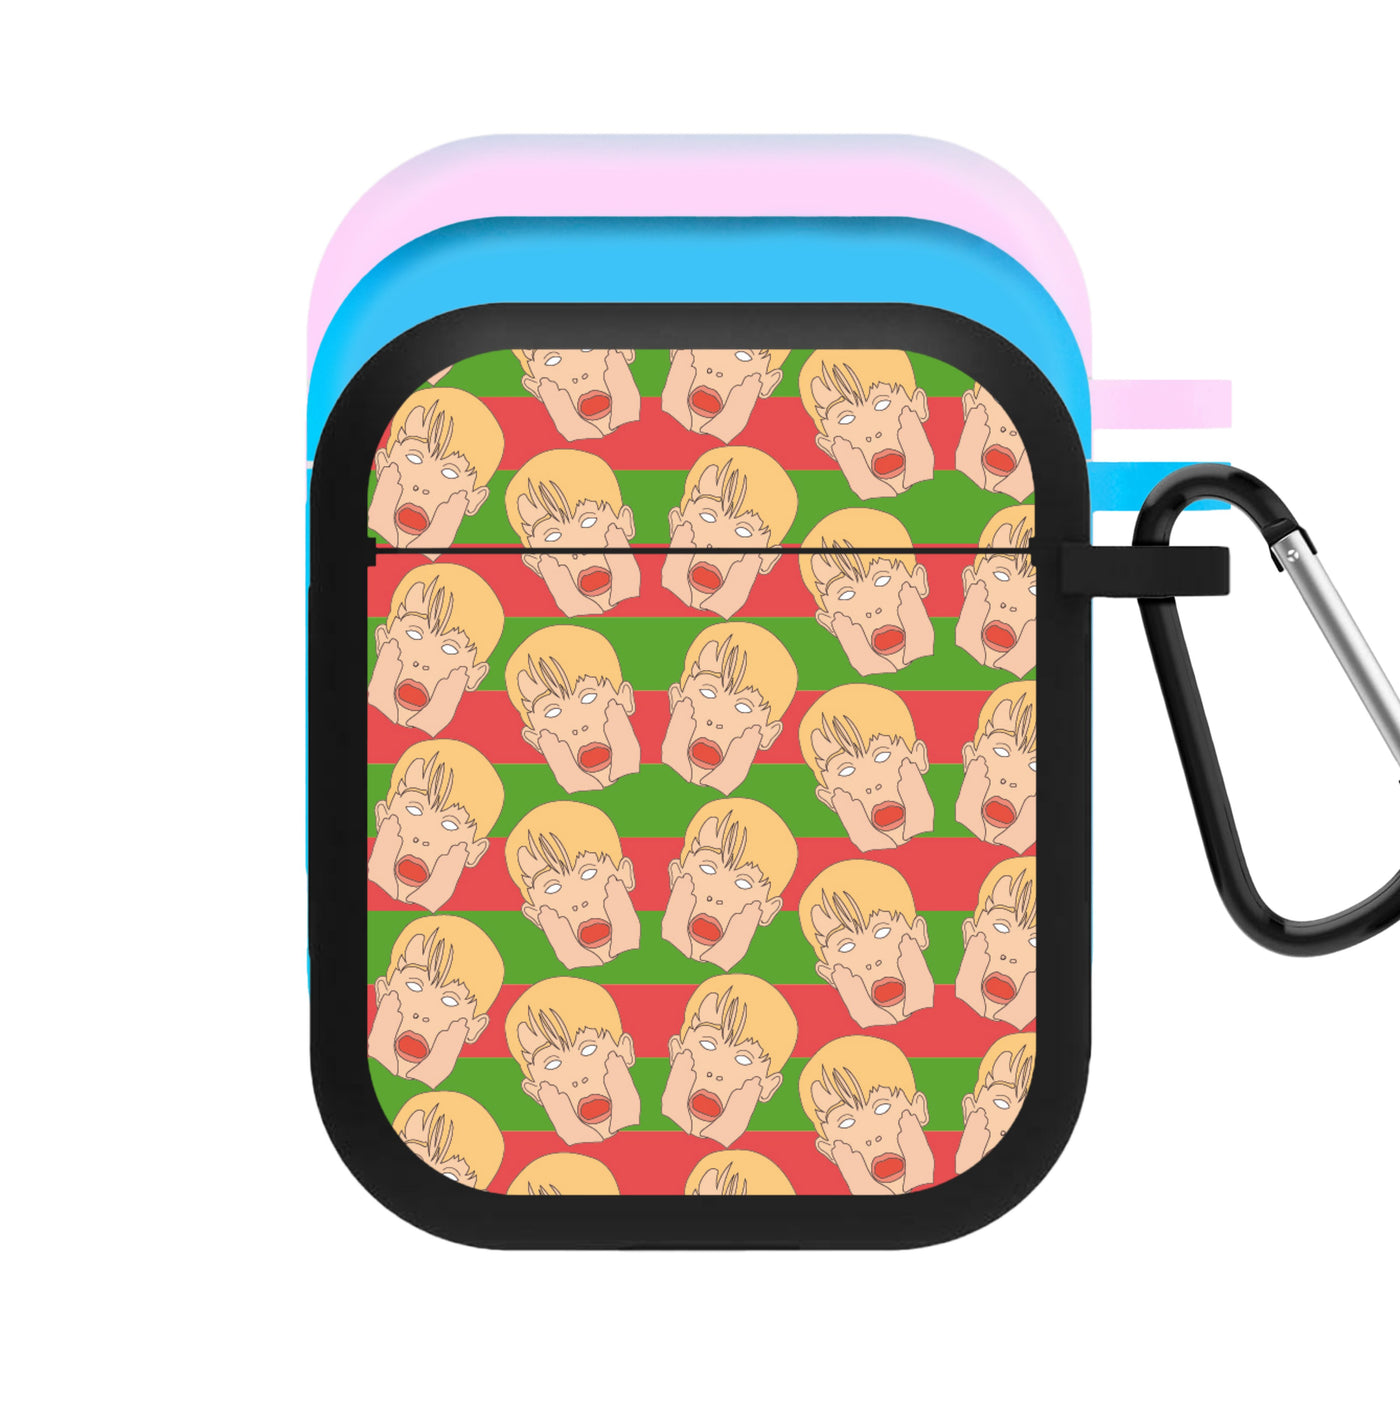 Kevin Pattern - Home Alone AirPods Case